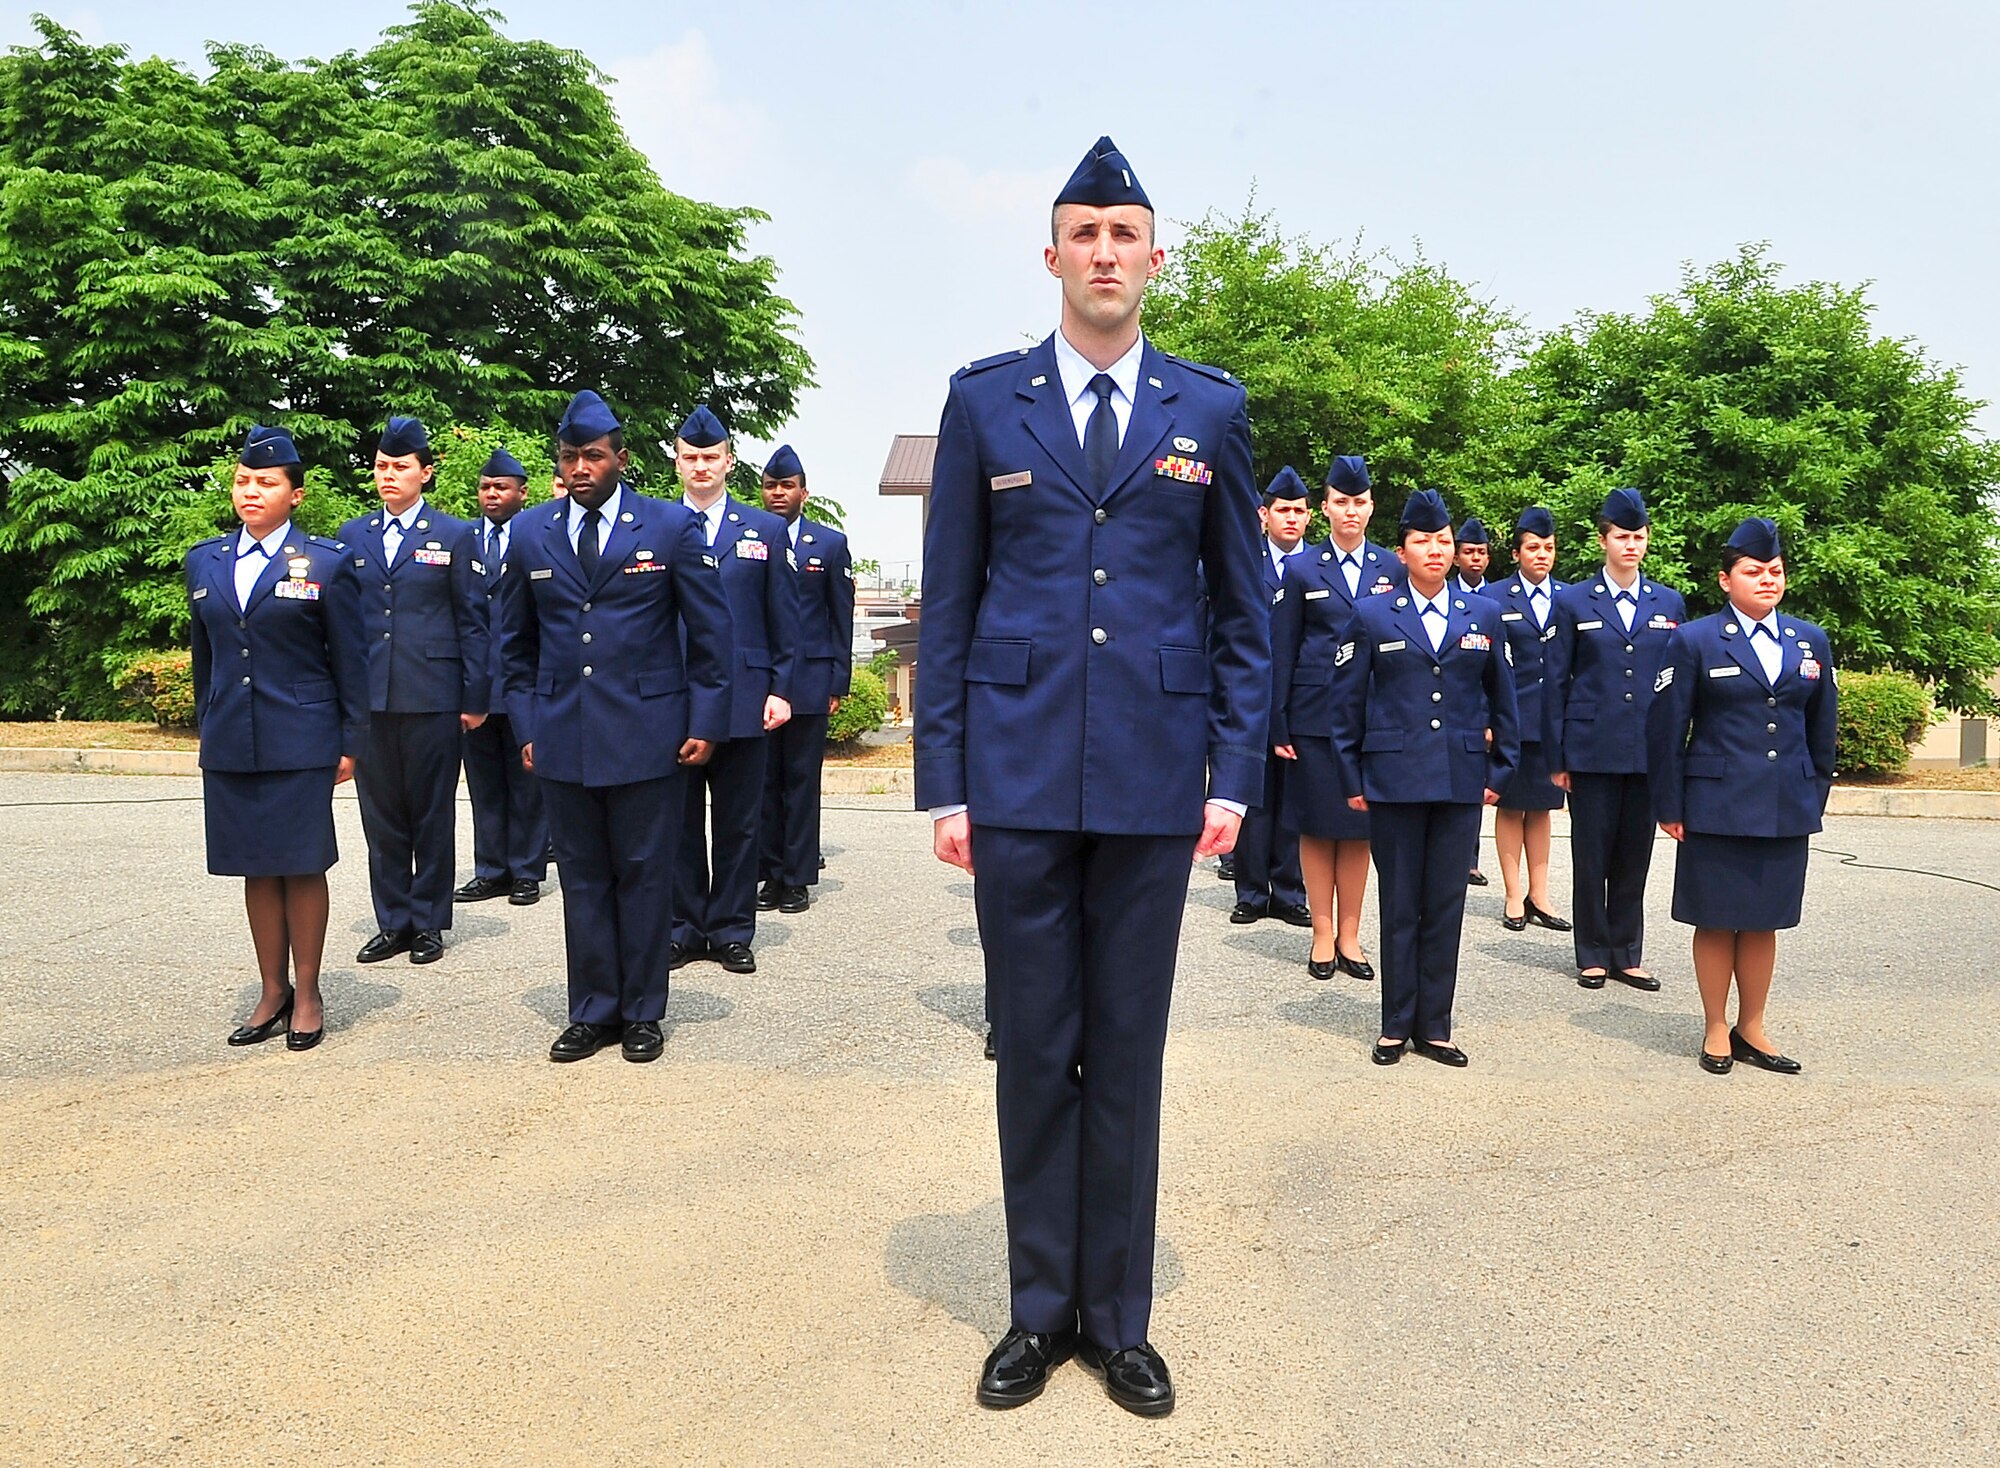 Airmen stand in formation during the Capt. James A. Van Fleet Jr. monument unveiling here June 12, 2012. The bronze statue sits in front of the Officers’ Club and is dedicated to the 1,920 U.S. Airmen killed or wounded during the Korean War. (U.S. Air Force photo/Senior Airman Adam Grant)